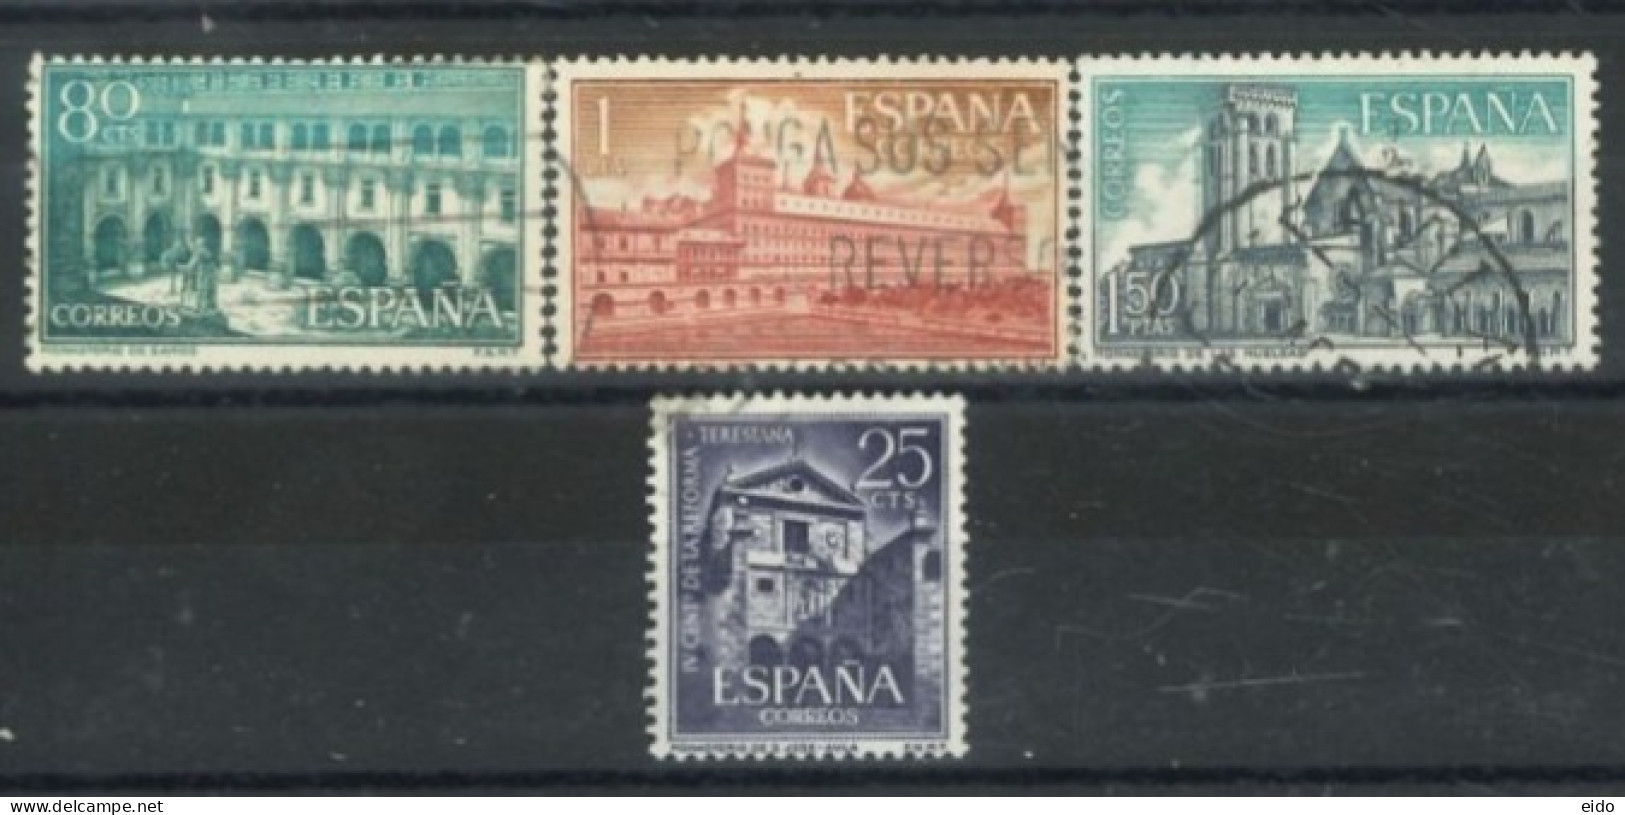 SPAIN, 1960/61, MONASTERIES & SAN JOSE CONVENT STAMPS SET OF 4, USED. - Used Stamps